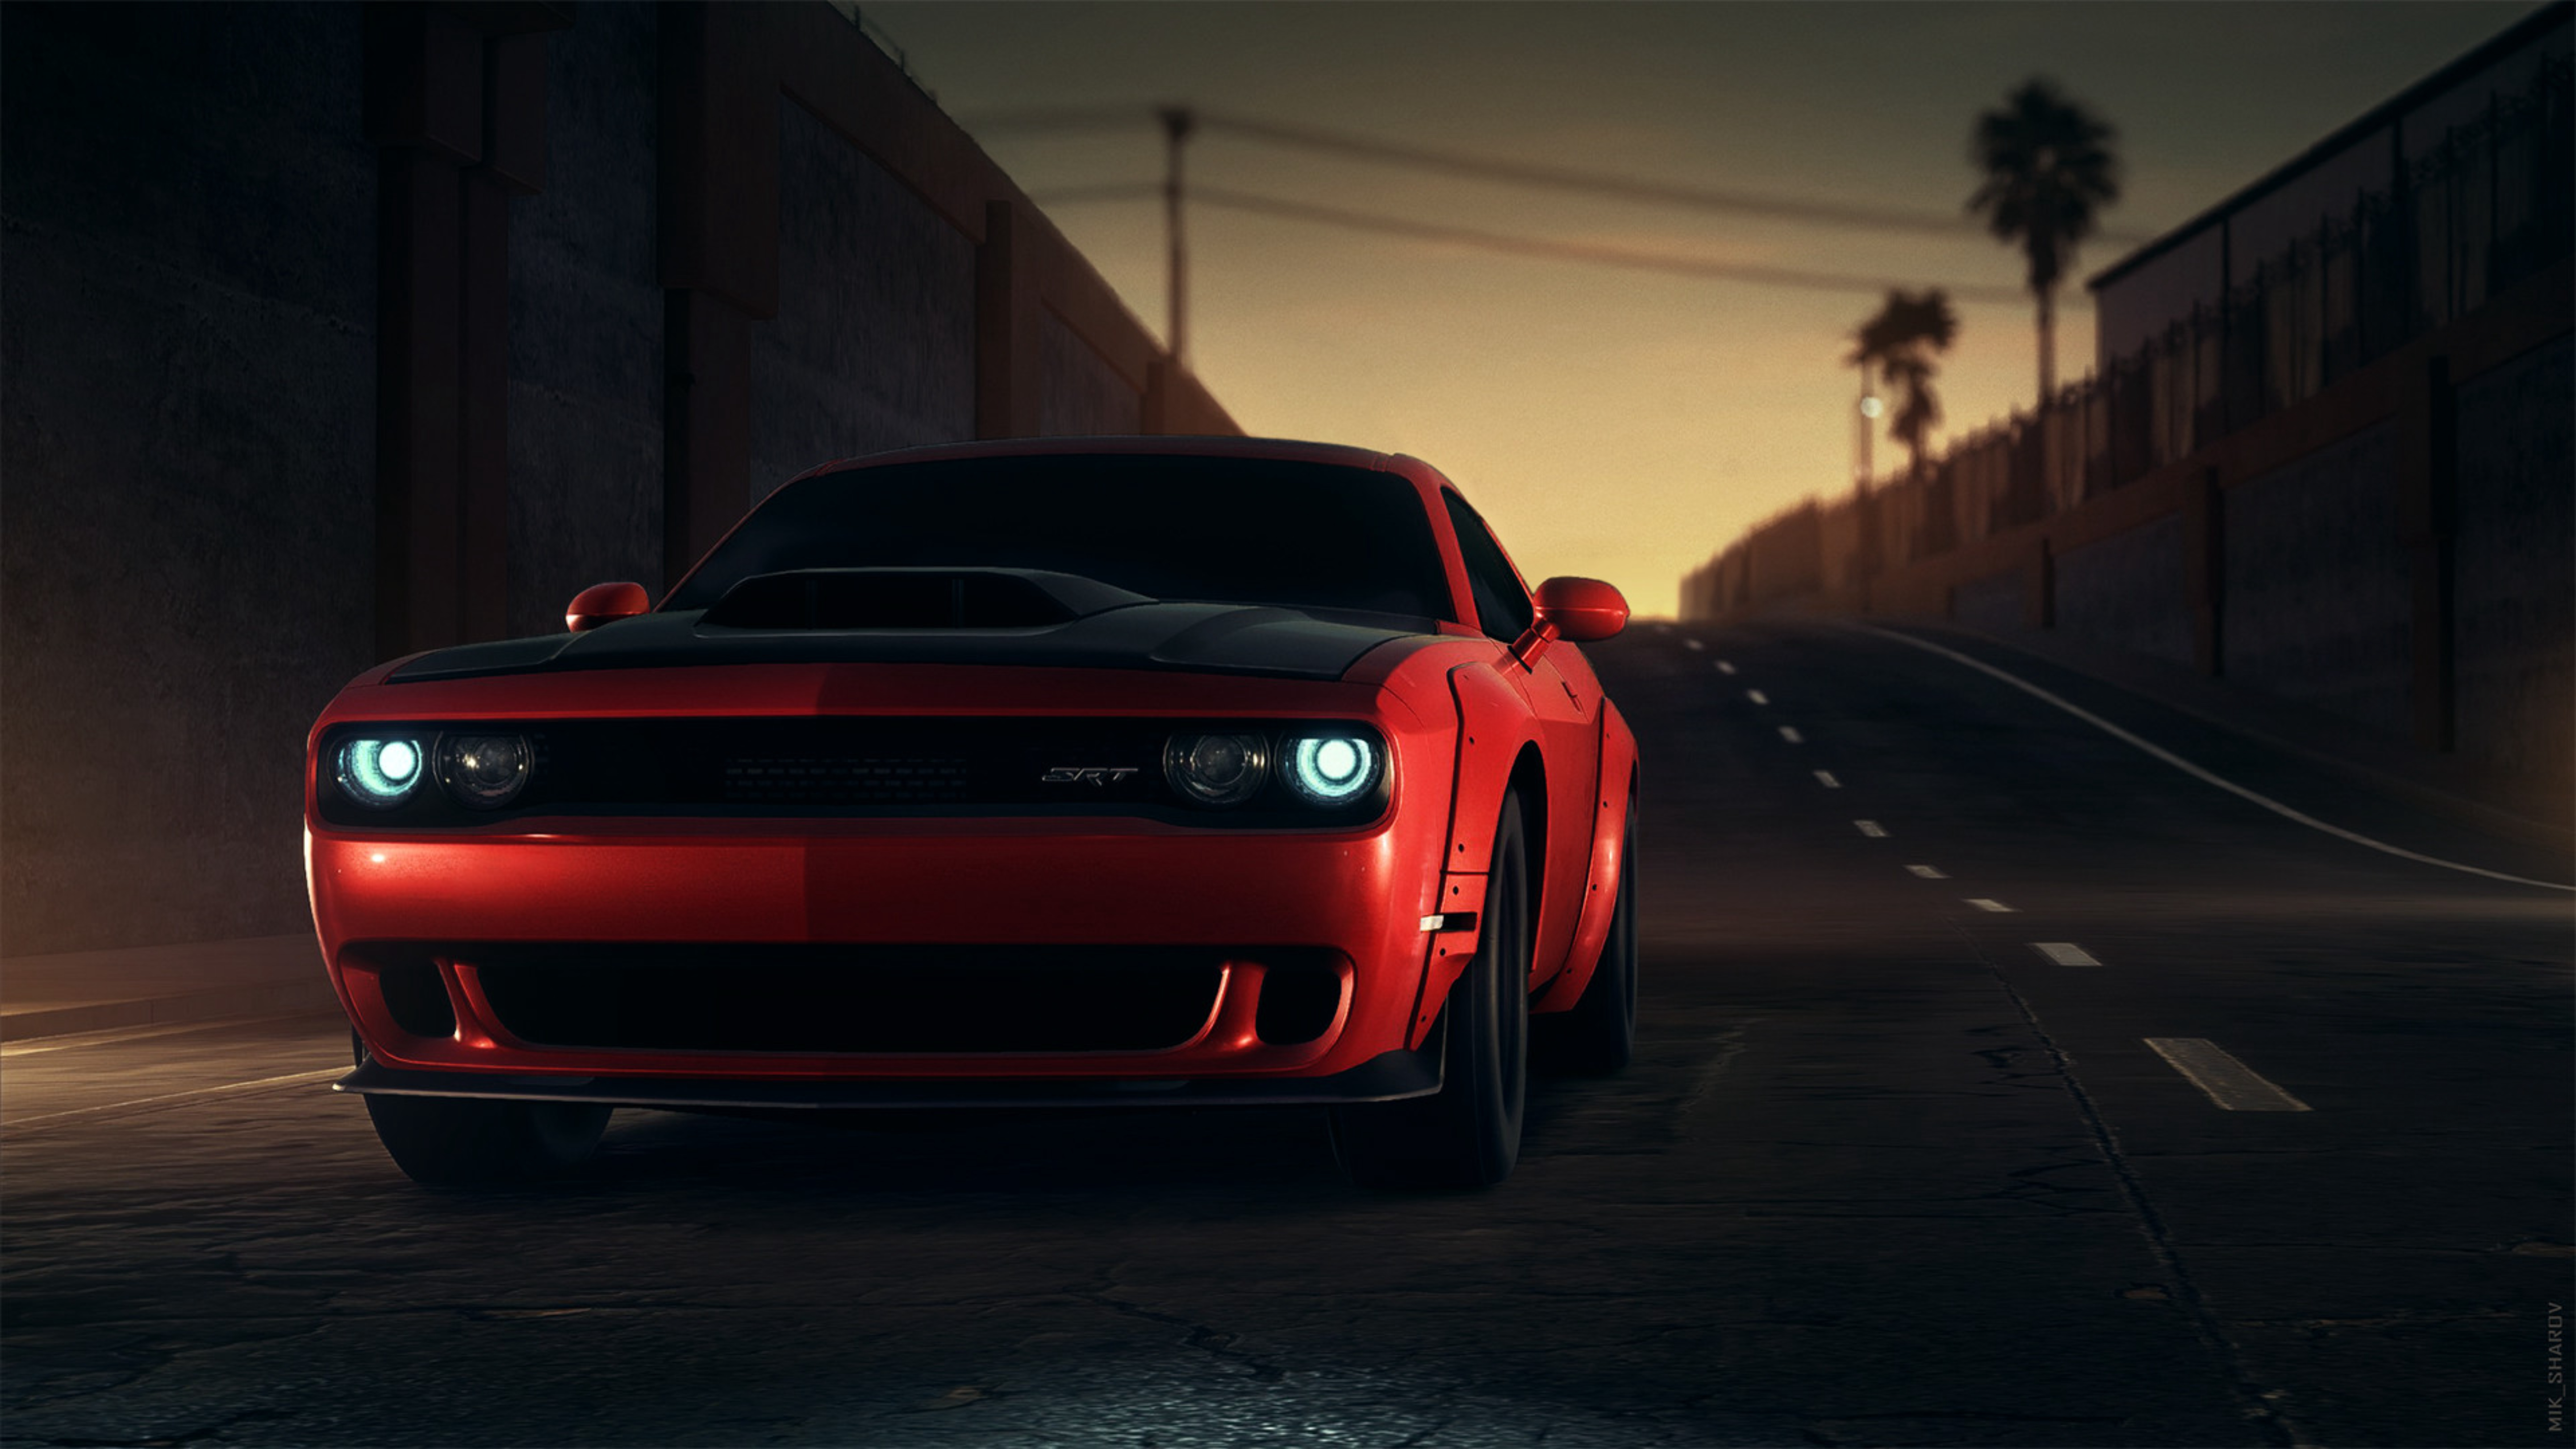 cars, sports car, front view, headlights, dodge srt, dodge, sports, red, lights Smartphone Background